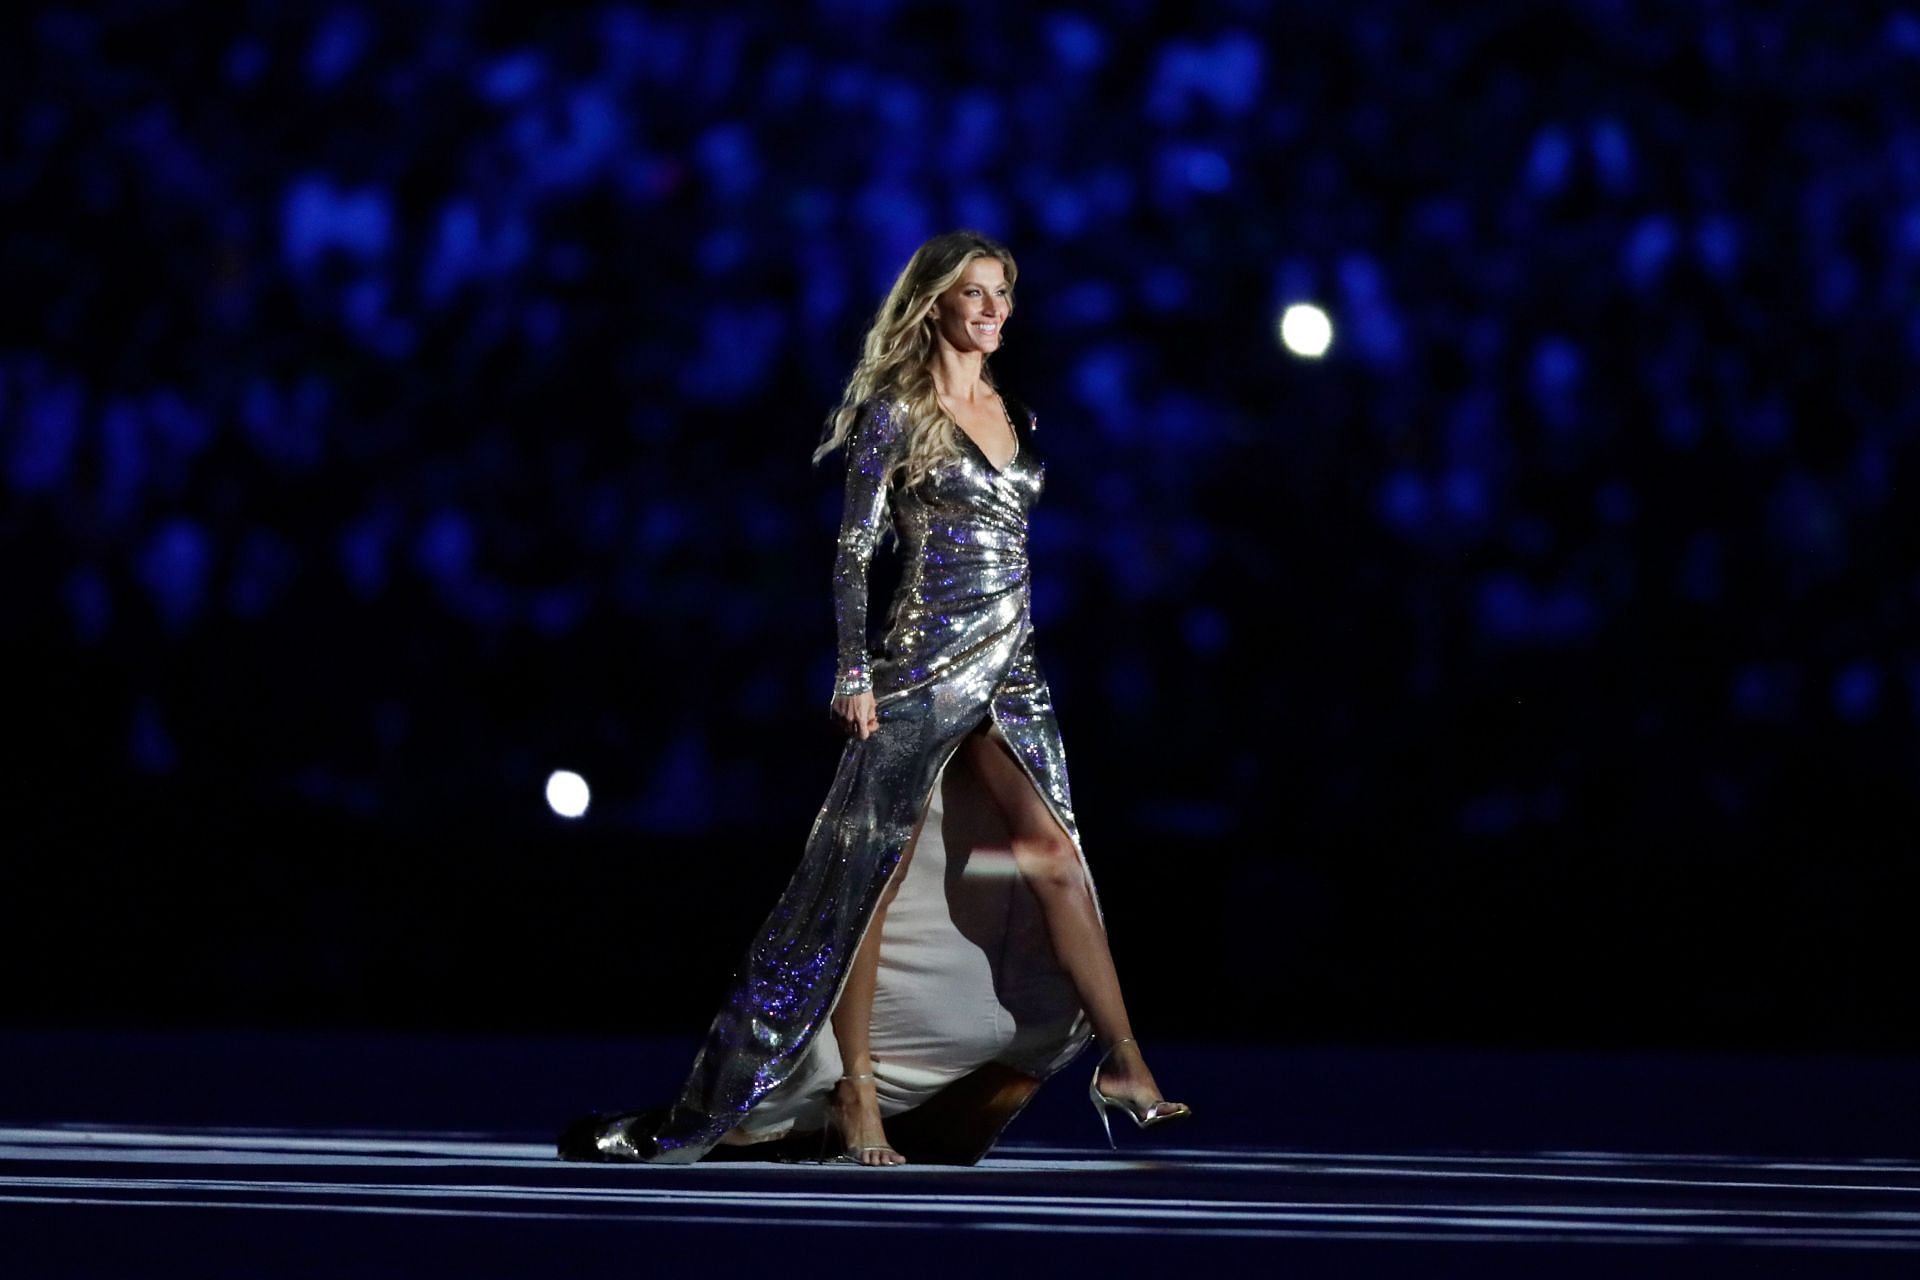 B&uuml;ndchen at the Opening Ceremony Rio 2016 Olympic Games